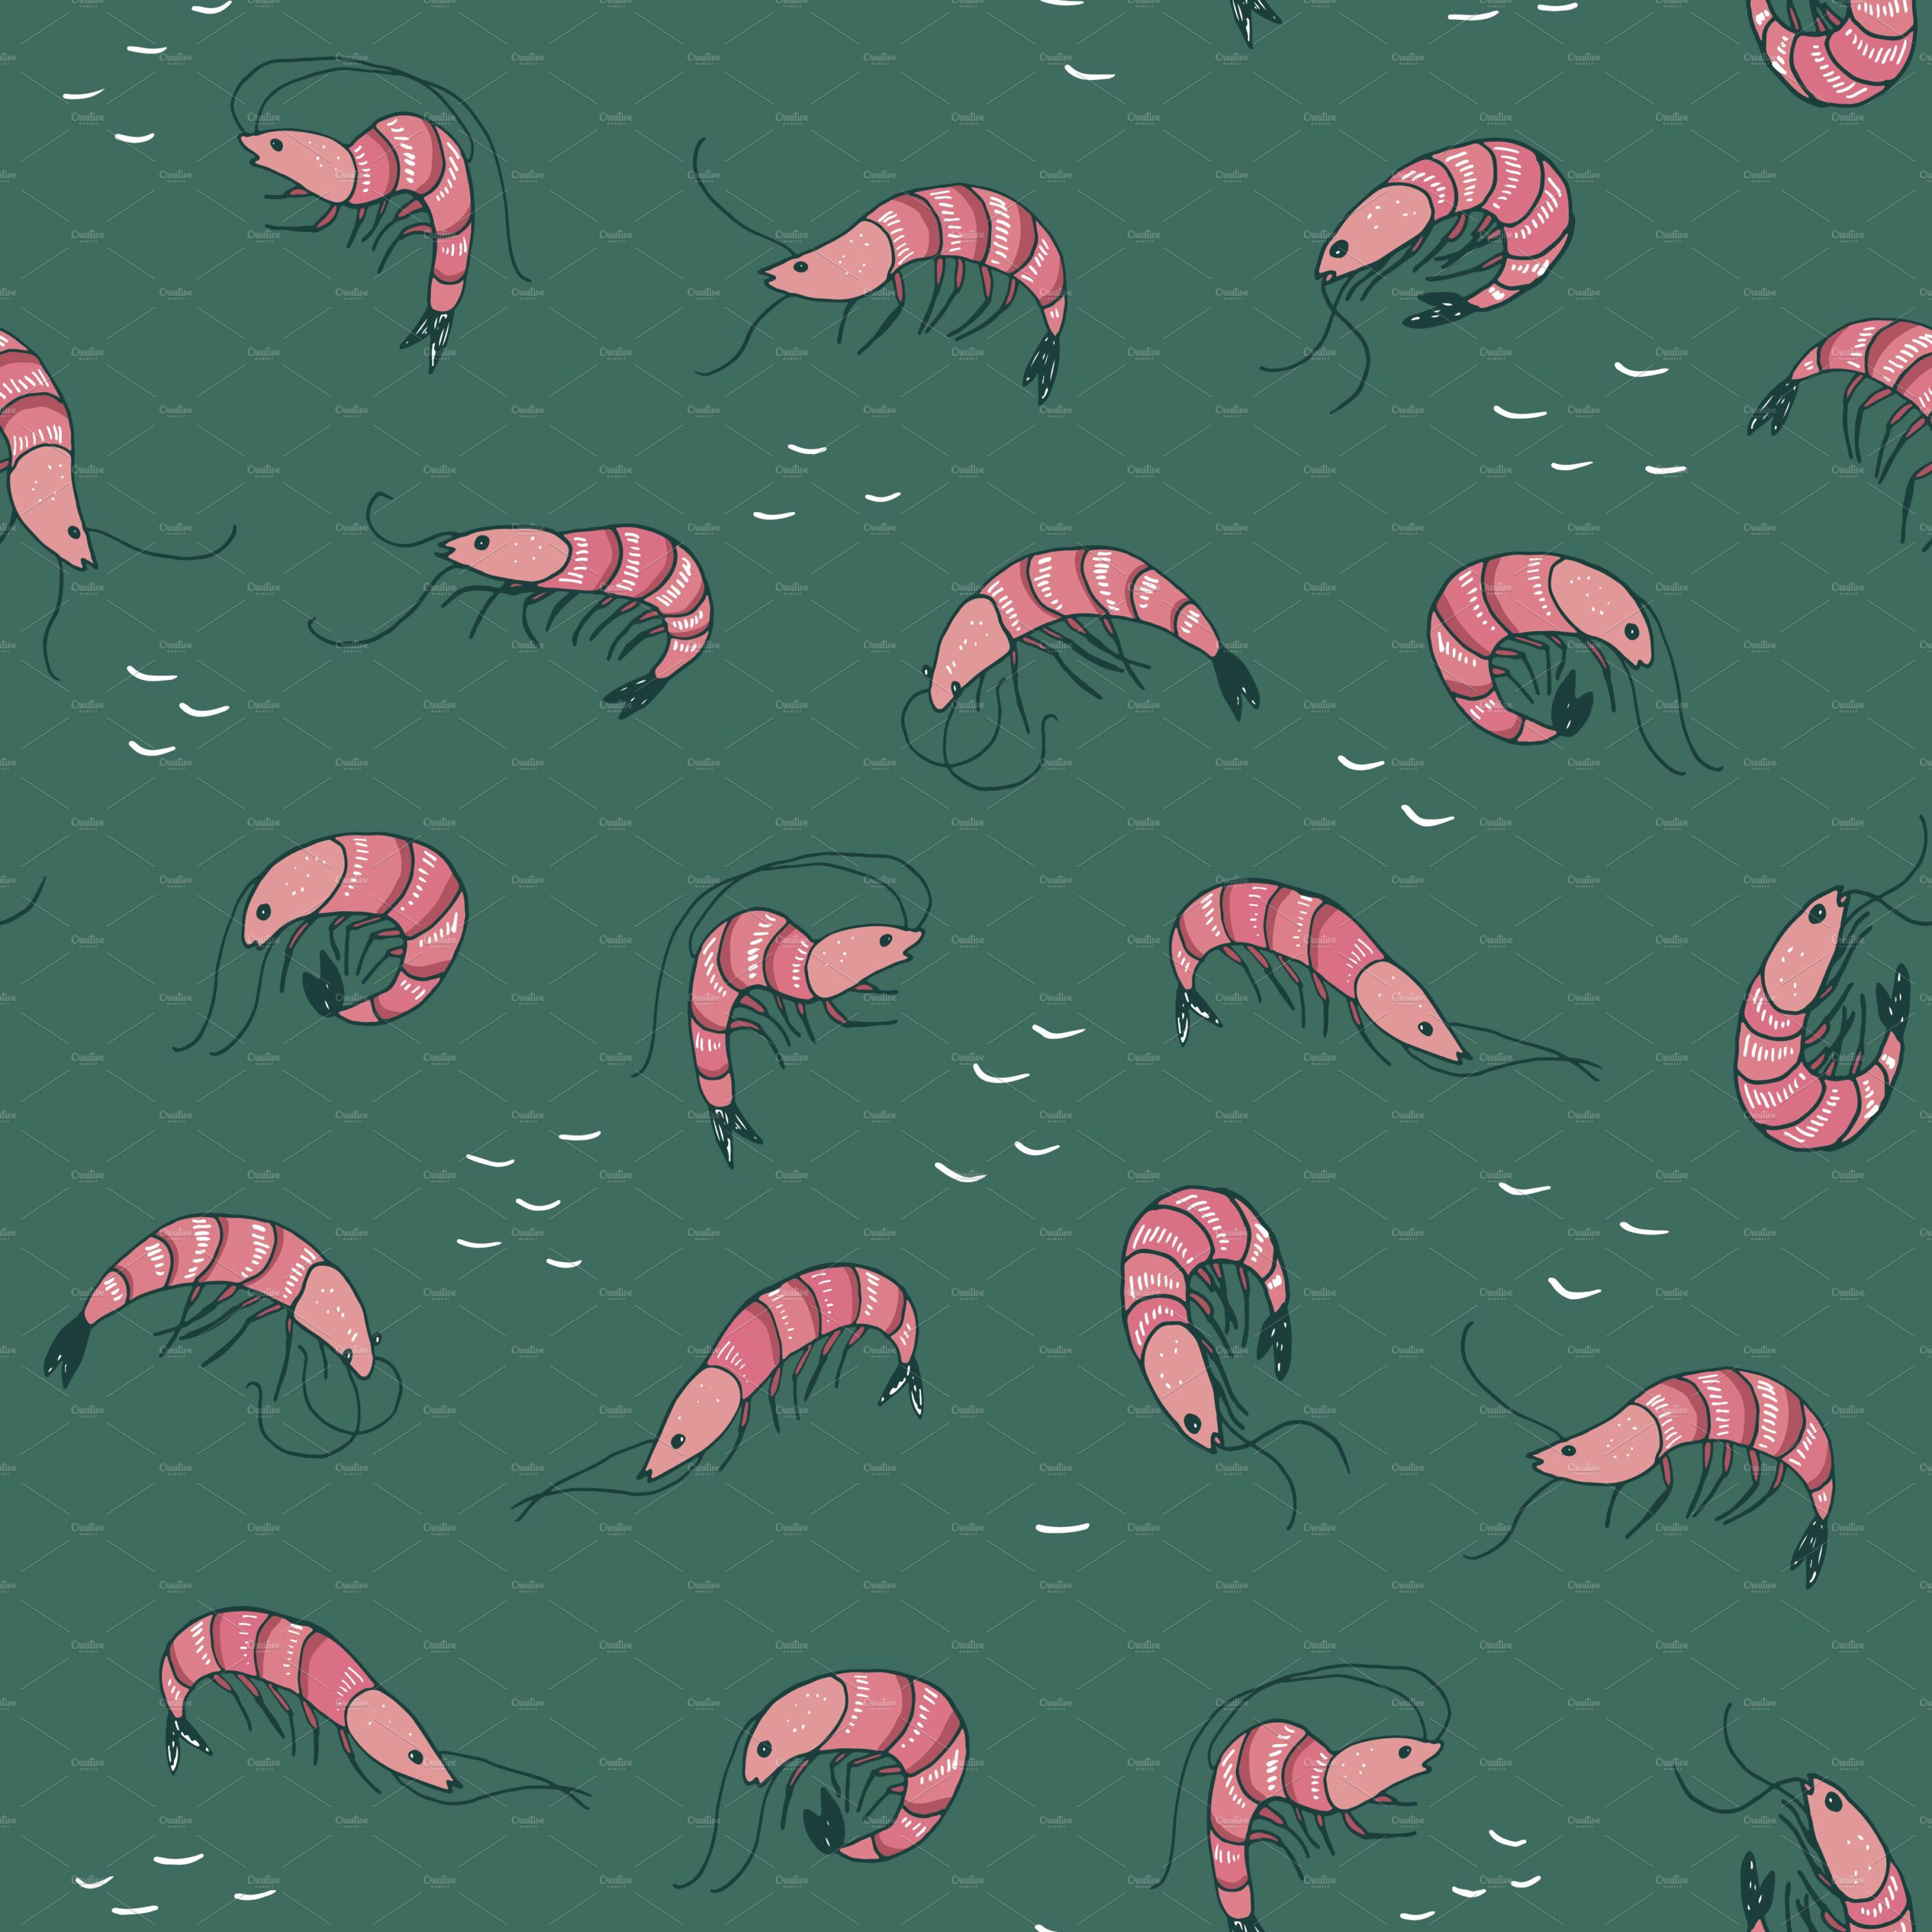 Green background with pink shrimps.